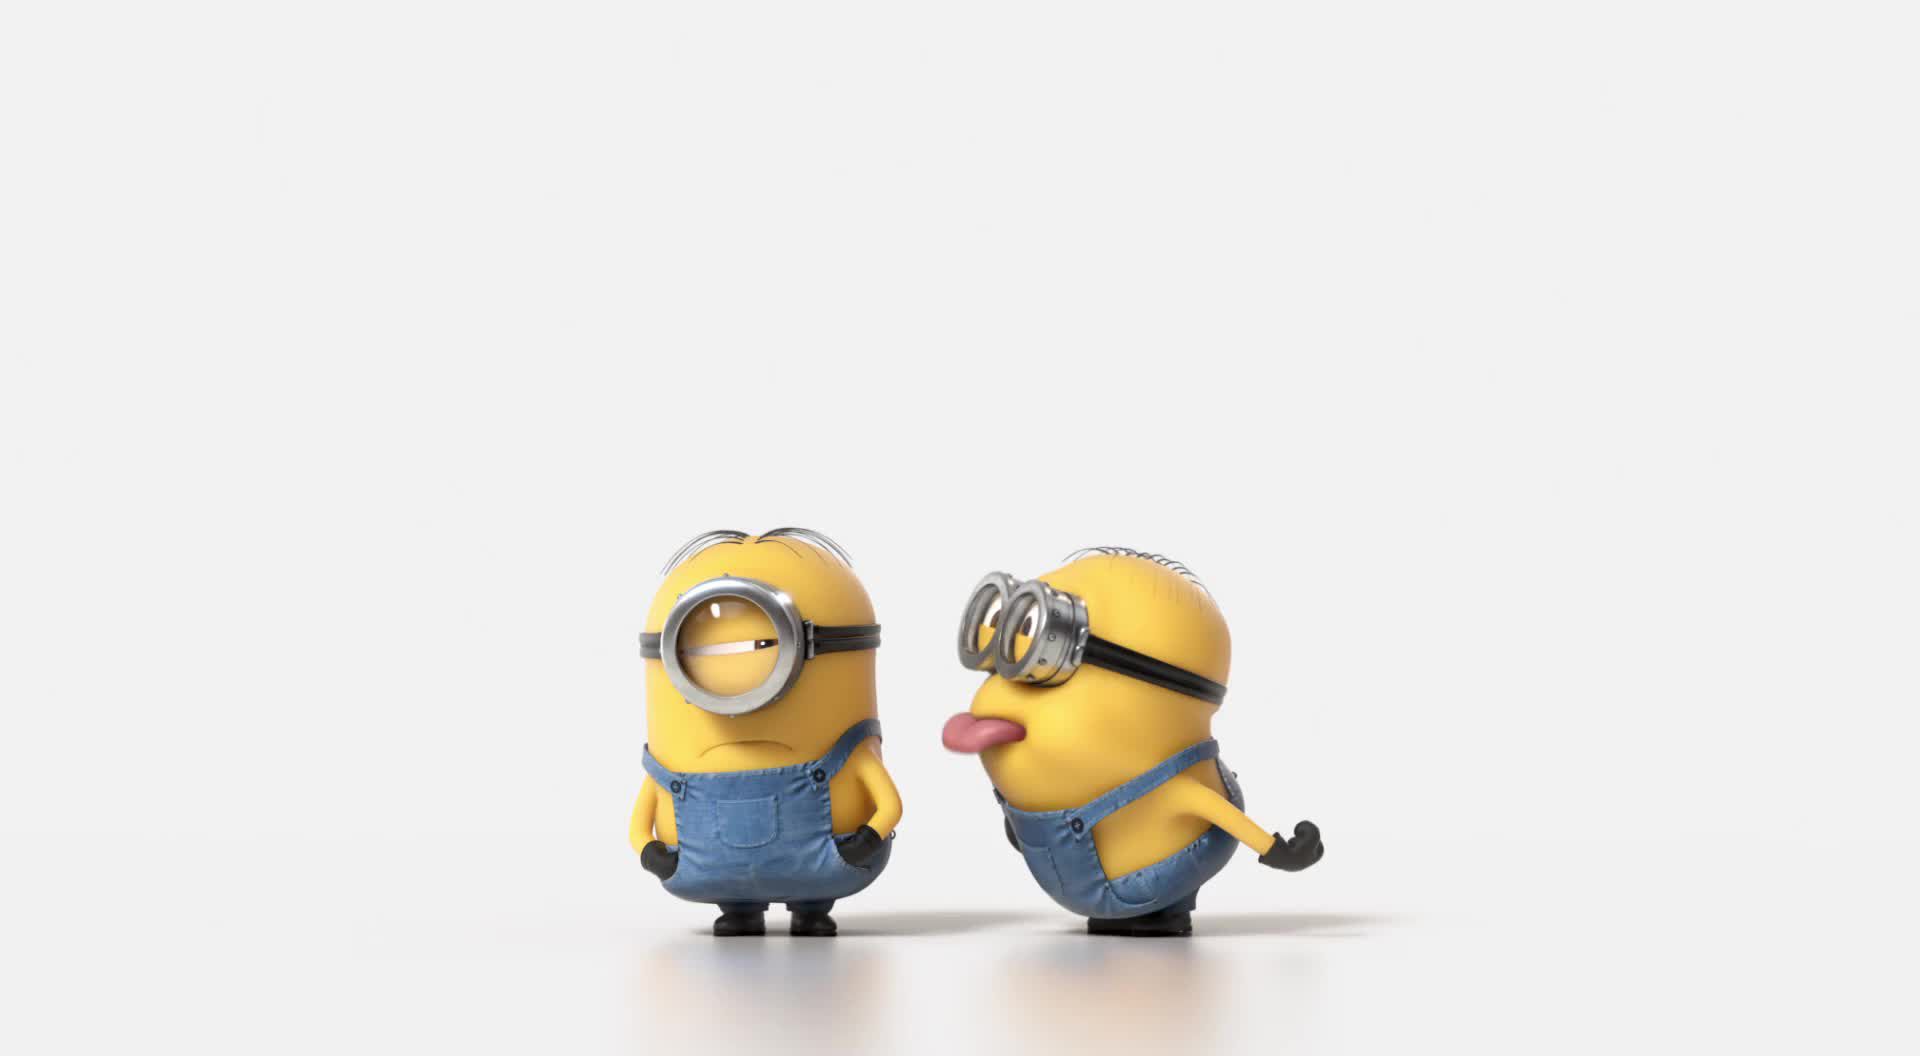 minions hd wallpapers